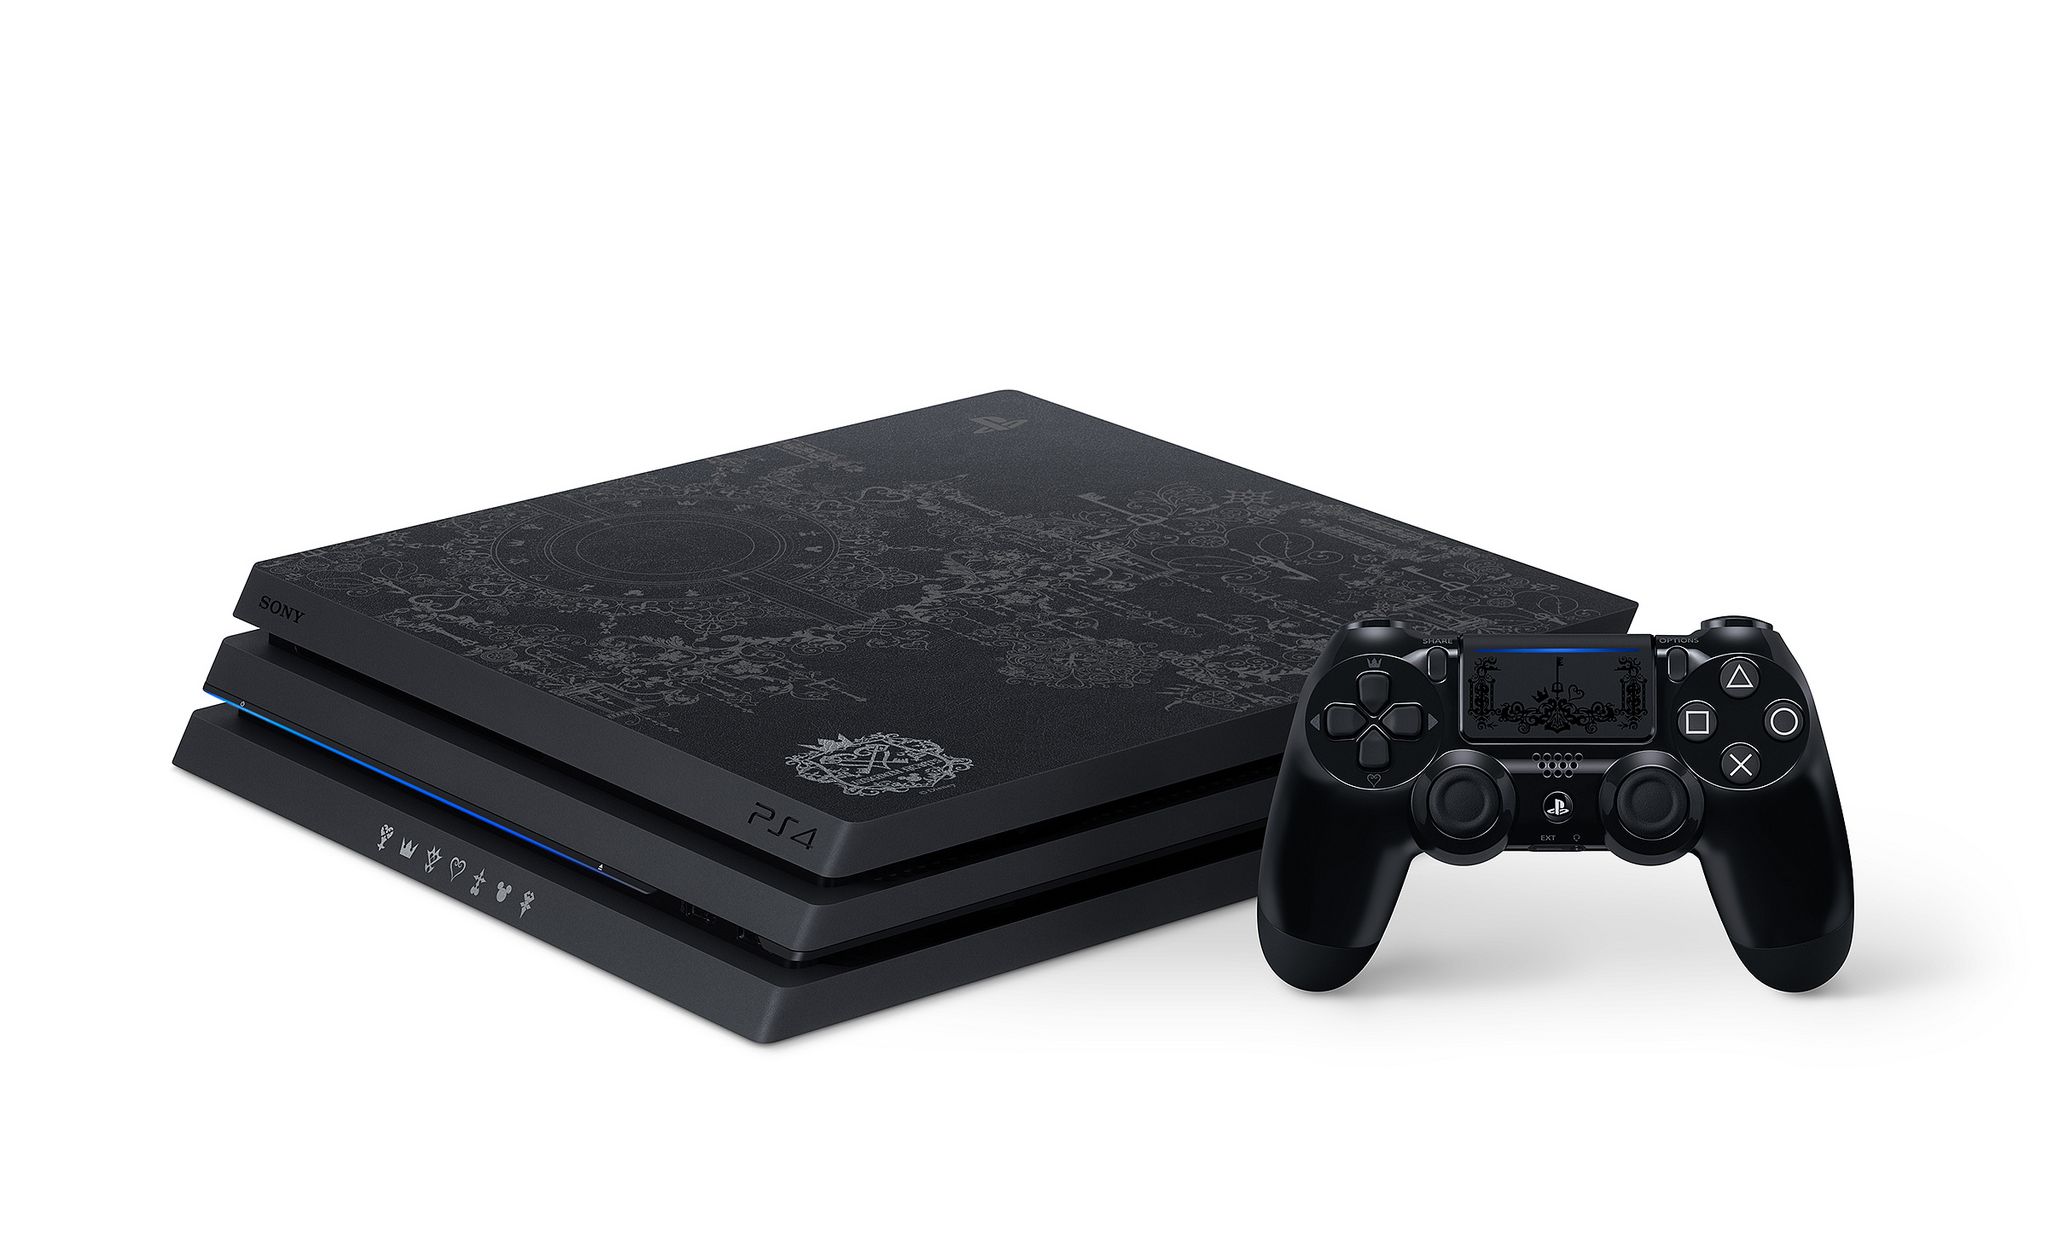 Image for This Kingdom Hearts 3 Limited Edition PS4 Pro is rather pretty